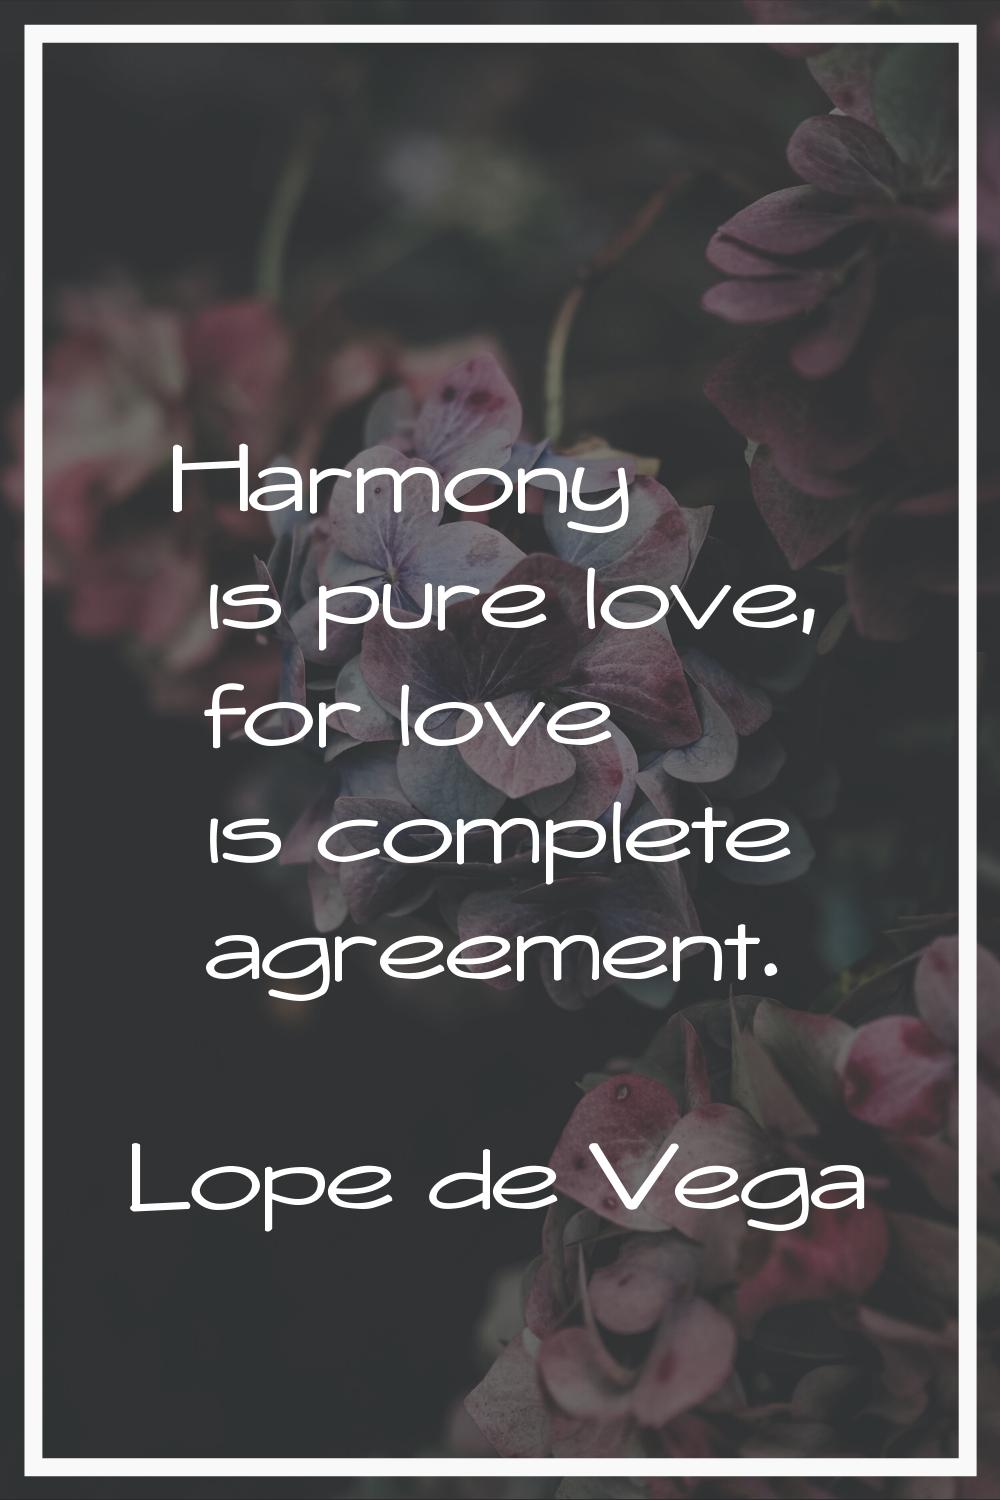 Harmony is pure love, for love is complete agreement.